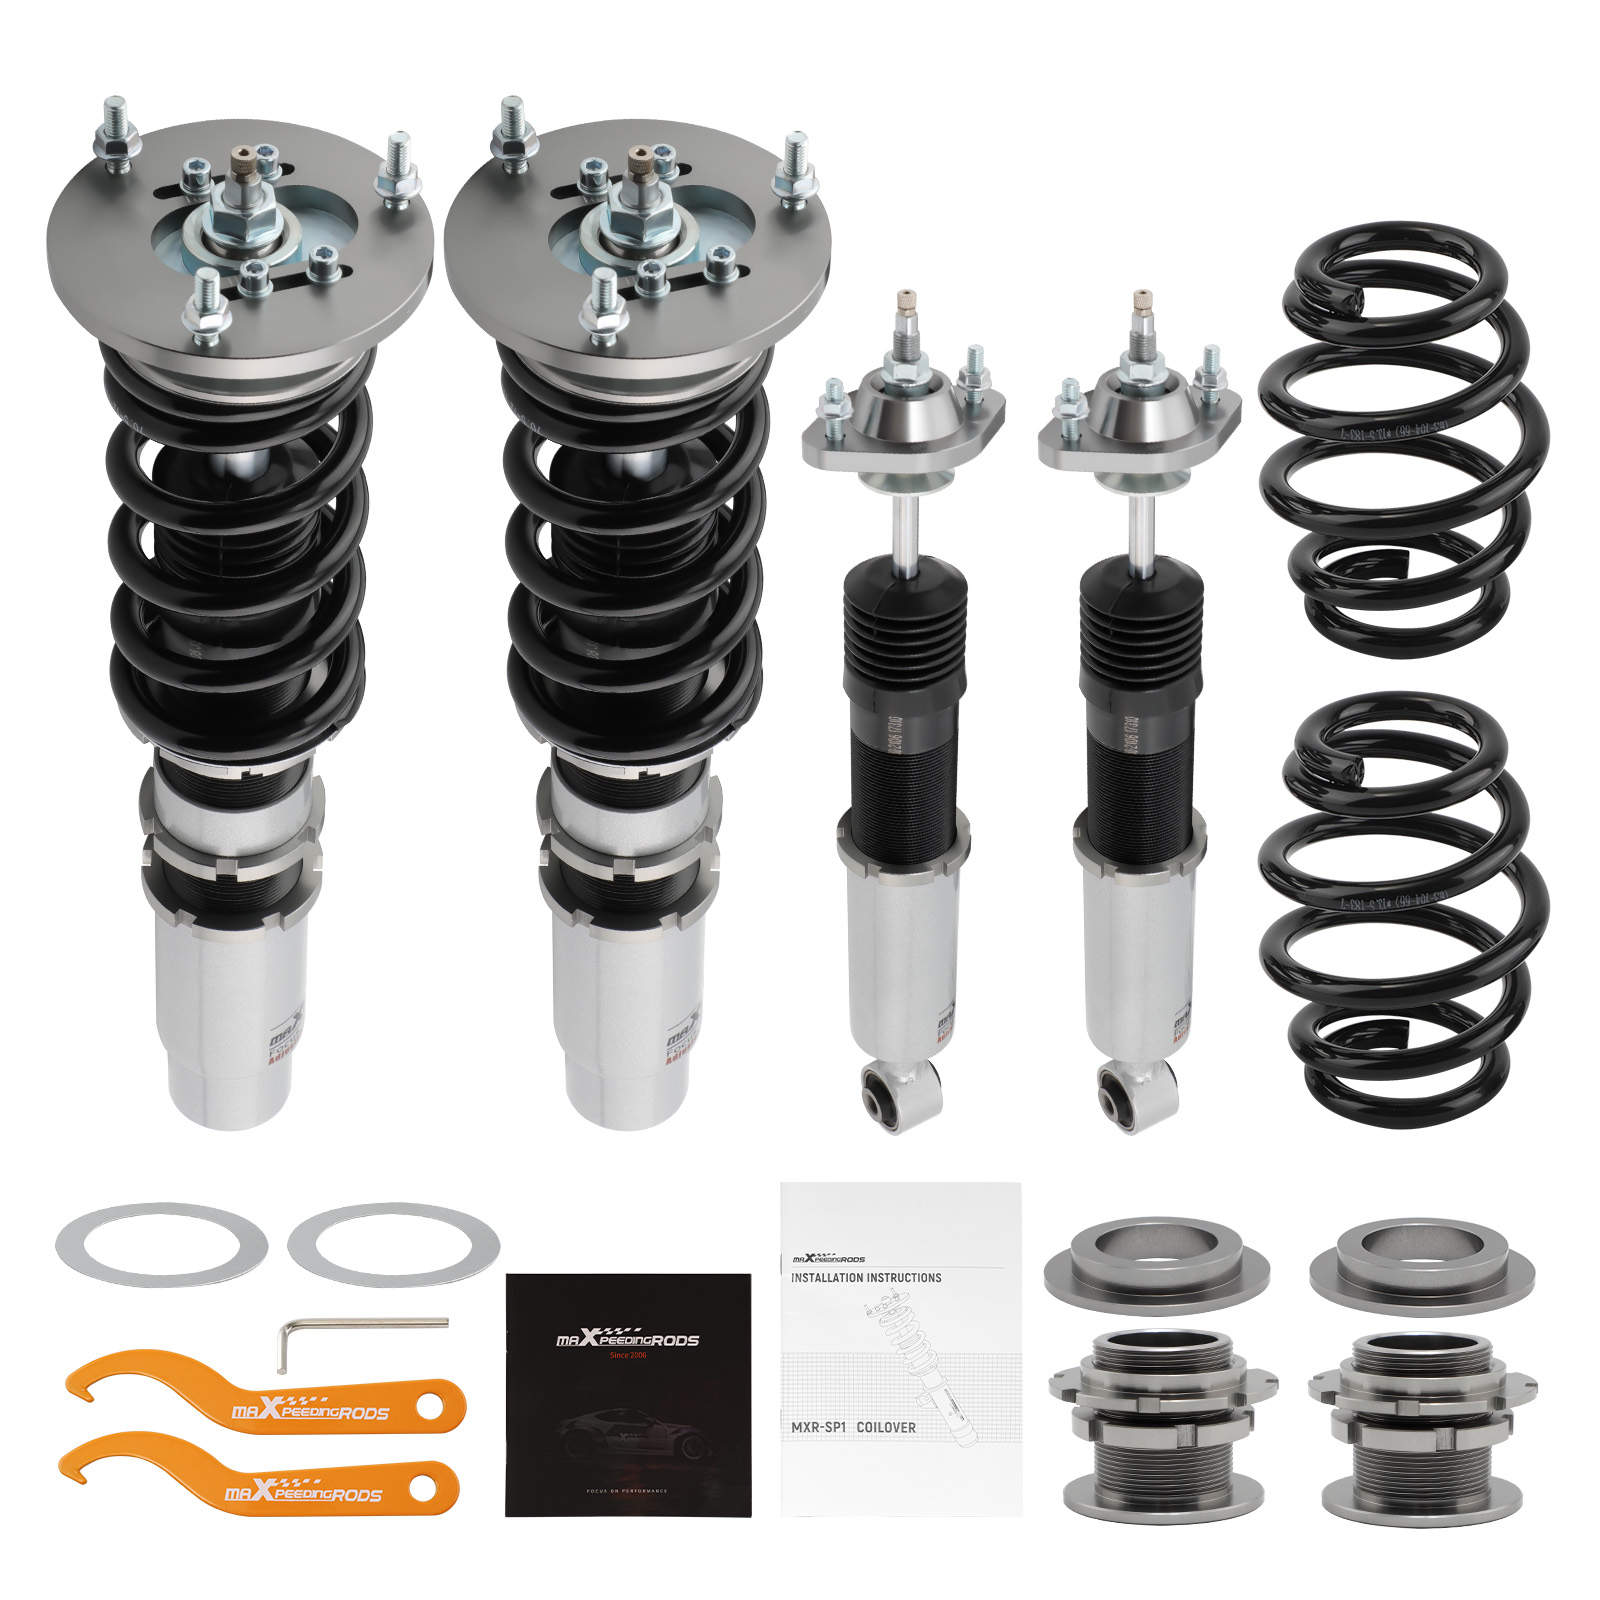 24 Ways Damper Coilovers for BMW 3 Series E46 Shock Absorbers